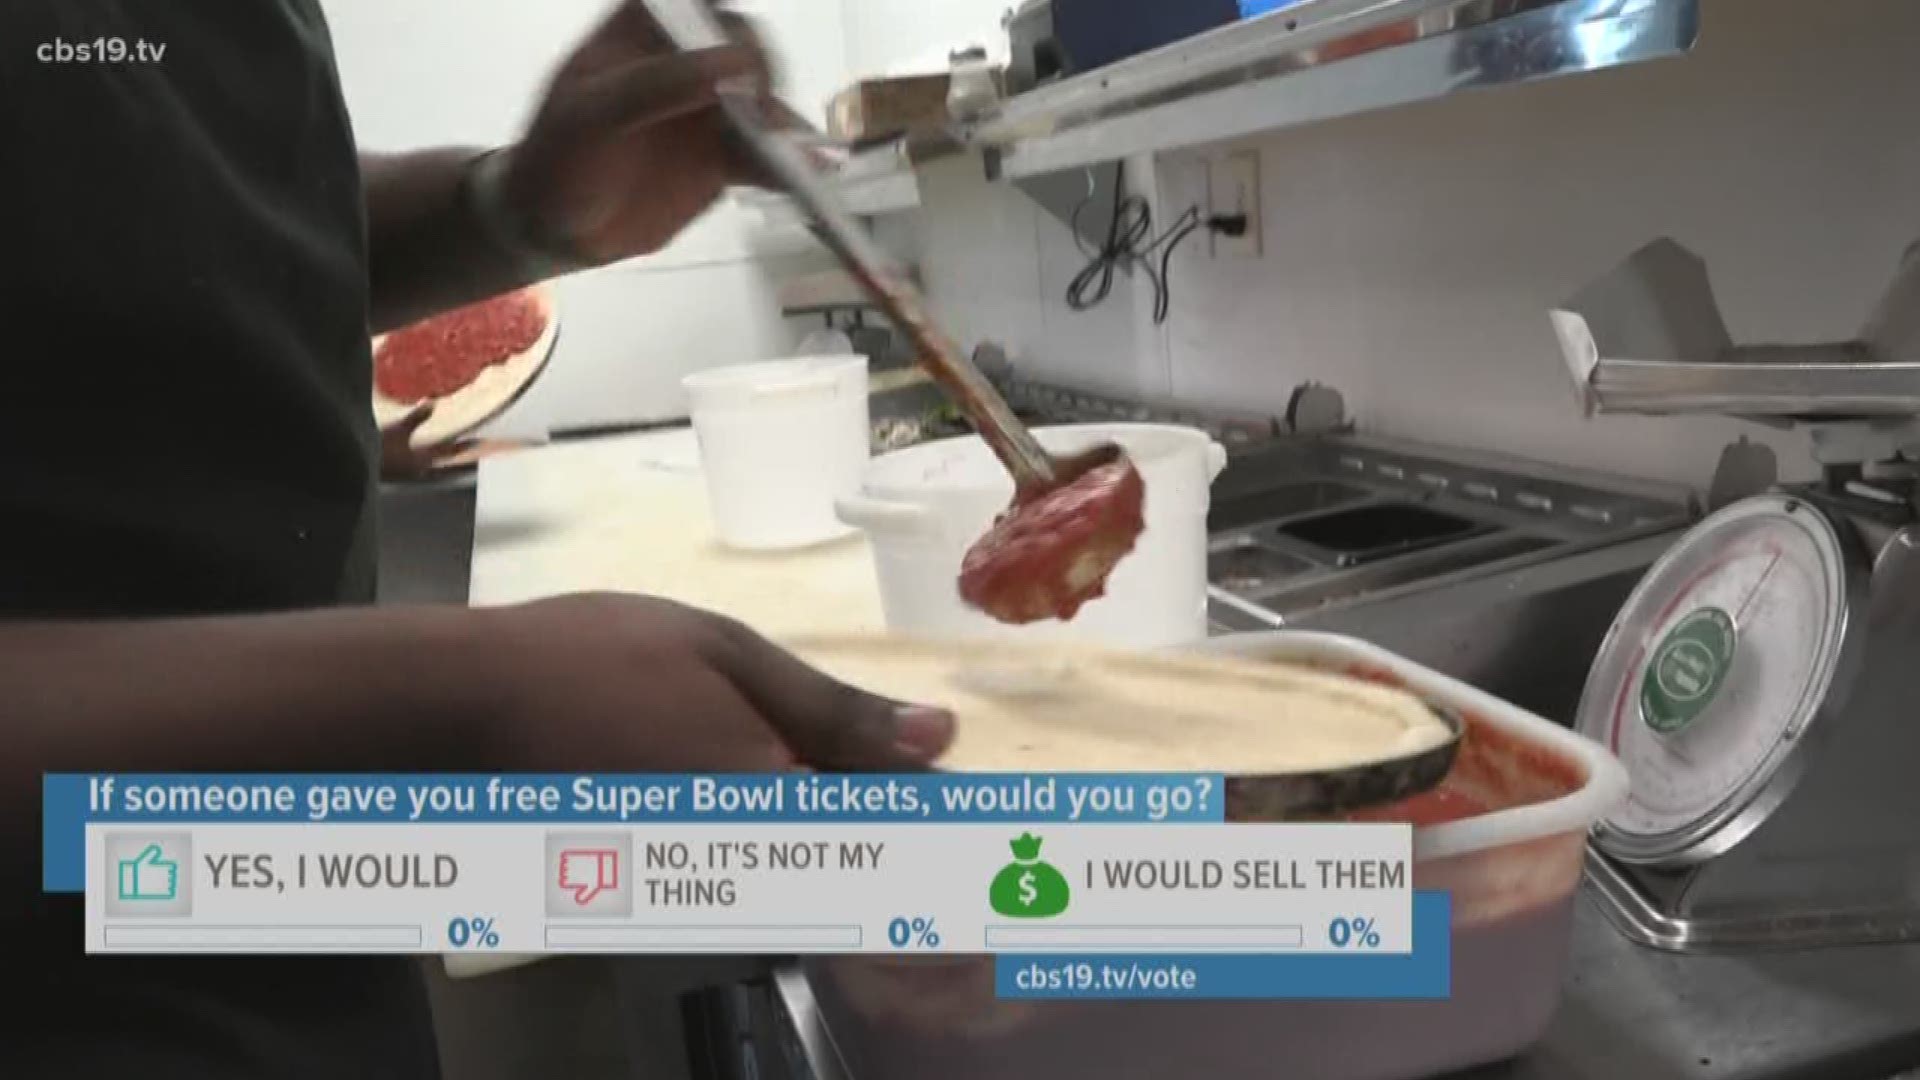 Millions of people will eat pizza for Super Bowl Sunday and many pizza places around town are getting prepared.